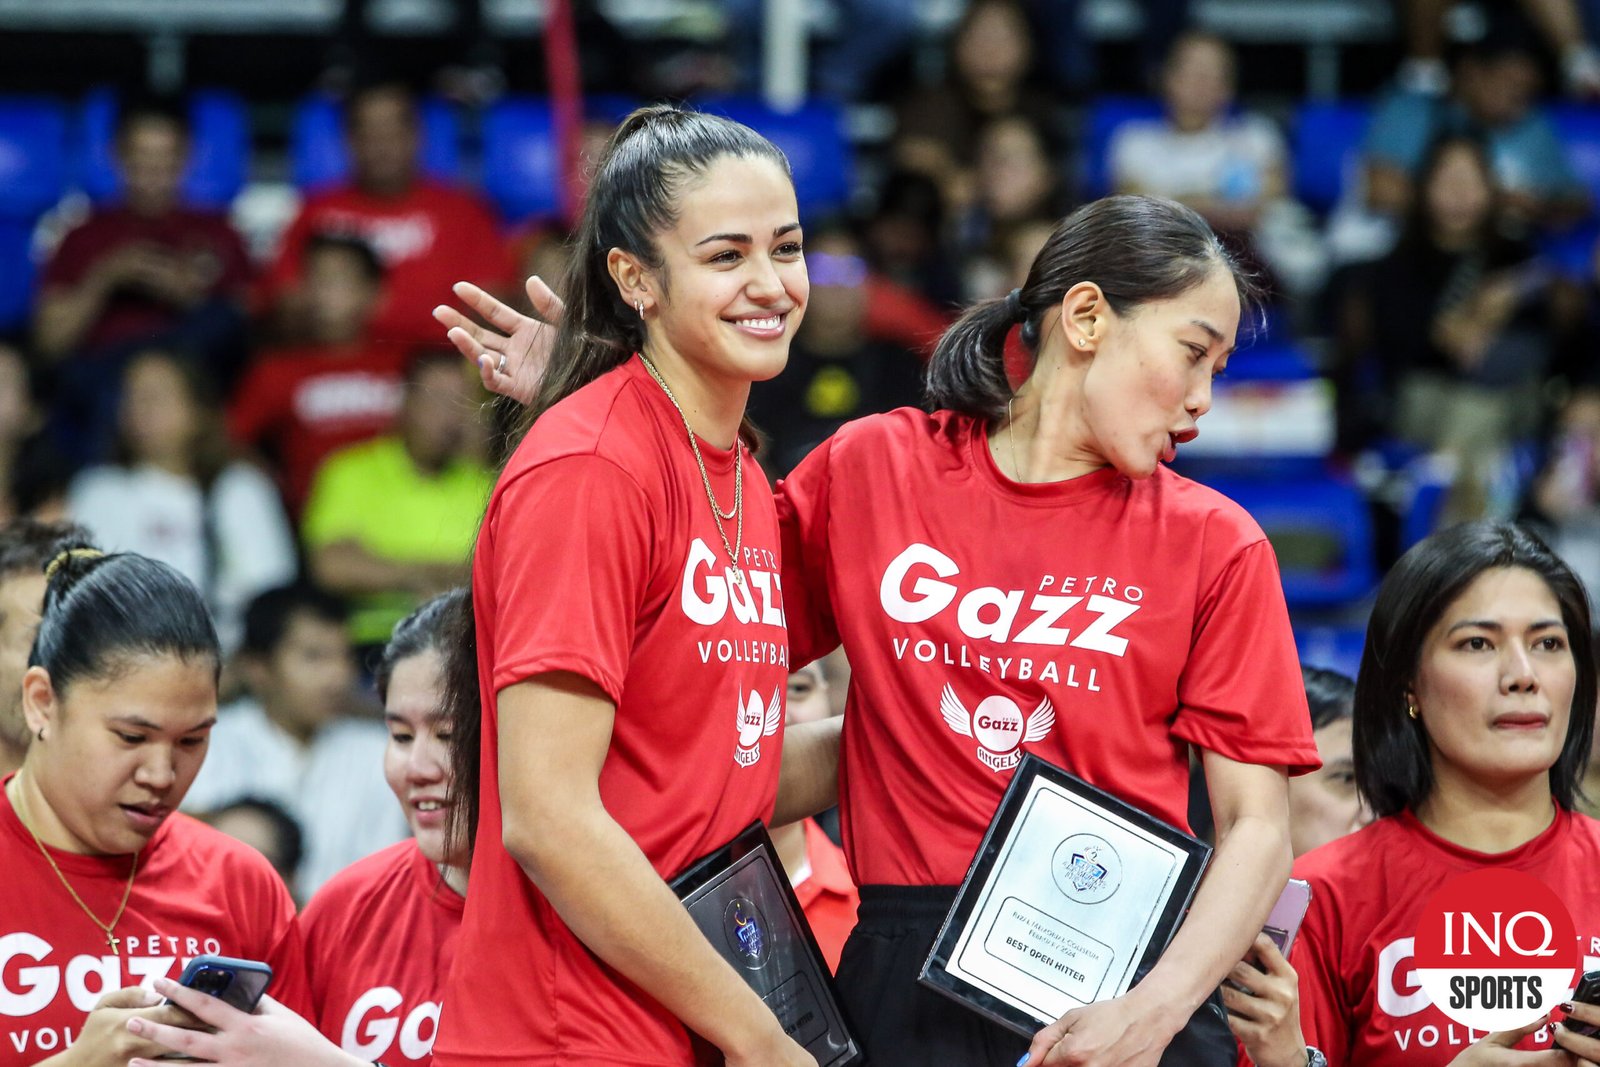 Brooke Van Sickle puts PVL on notice with strong Petro Gazz debut